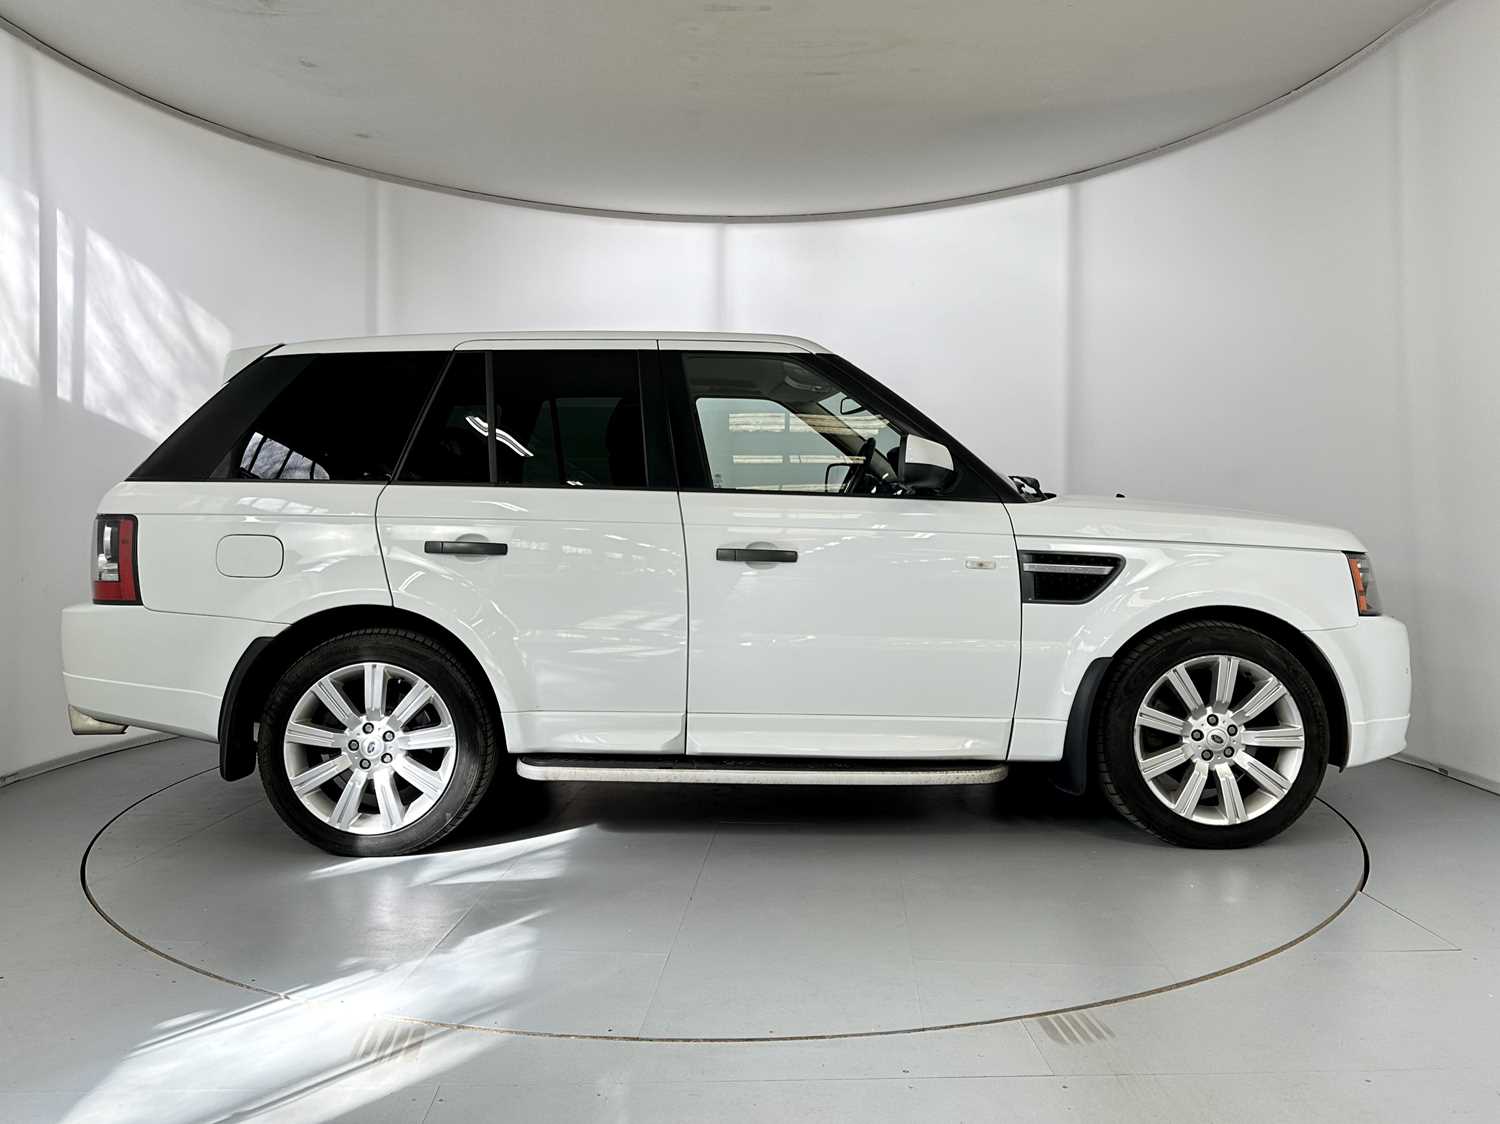 2011 Land Rover Range Rover Sport Stormer Edition  - Image 11 of 33